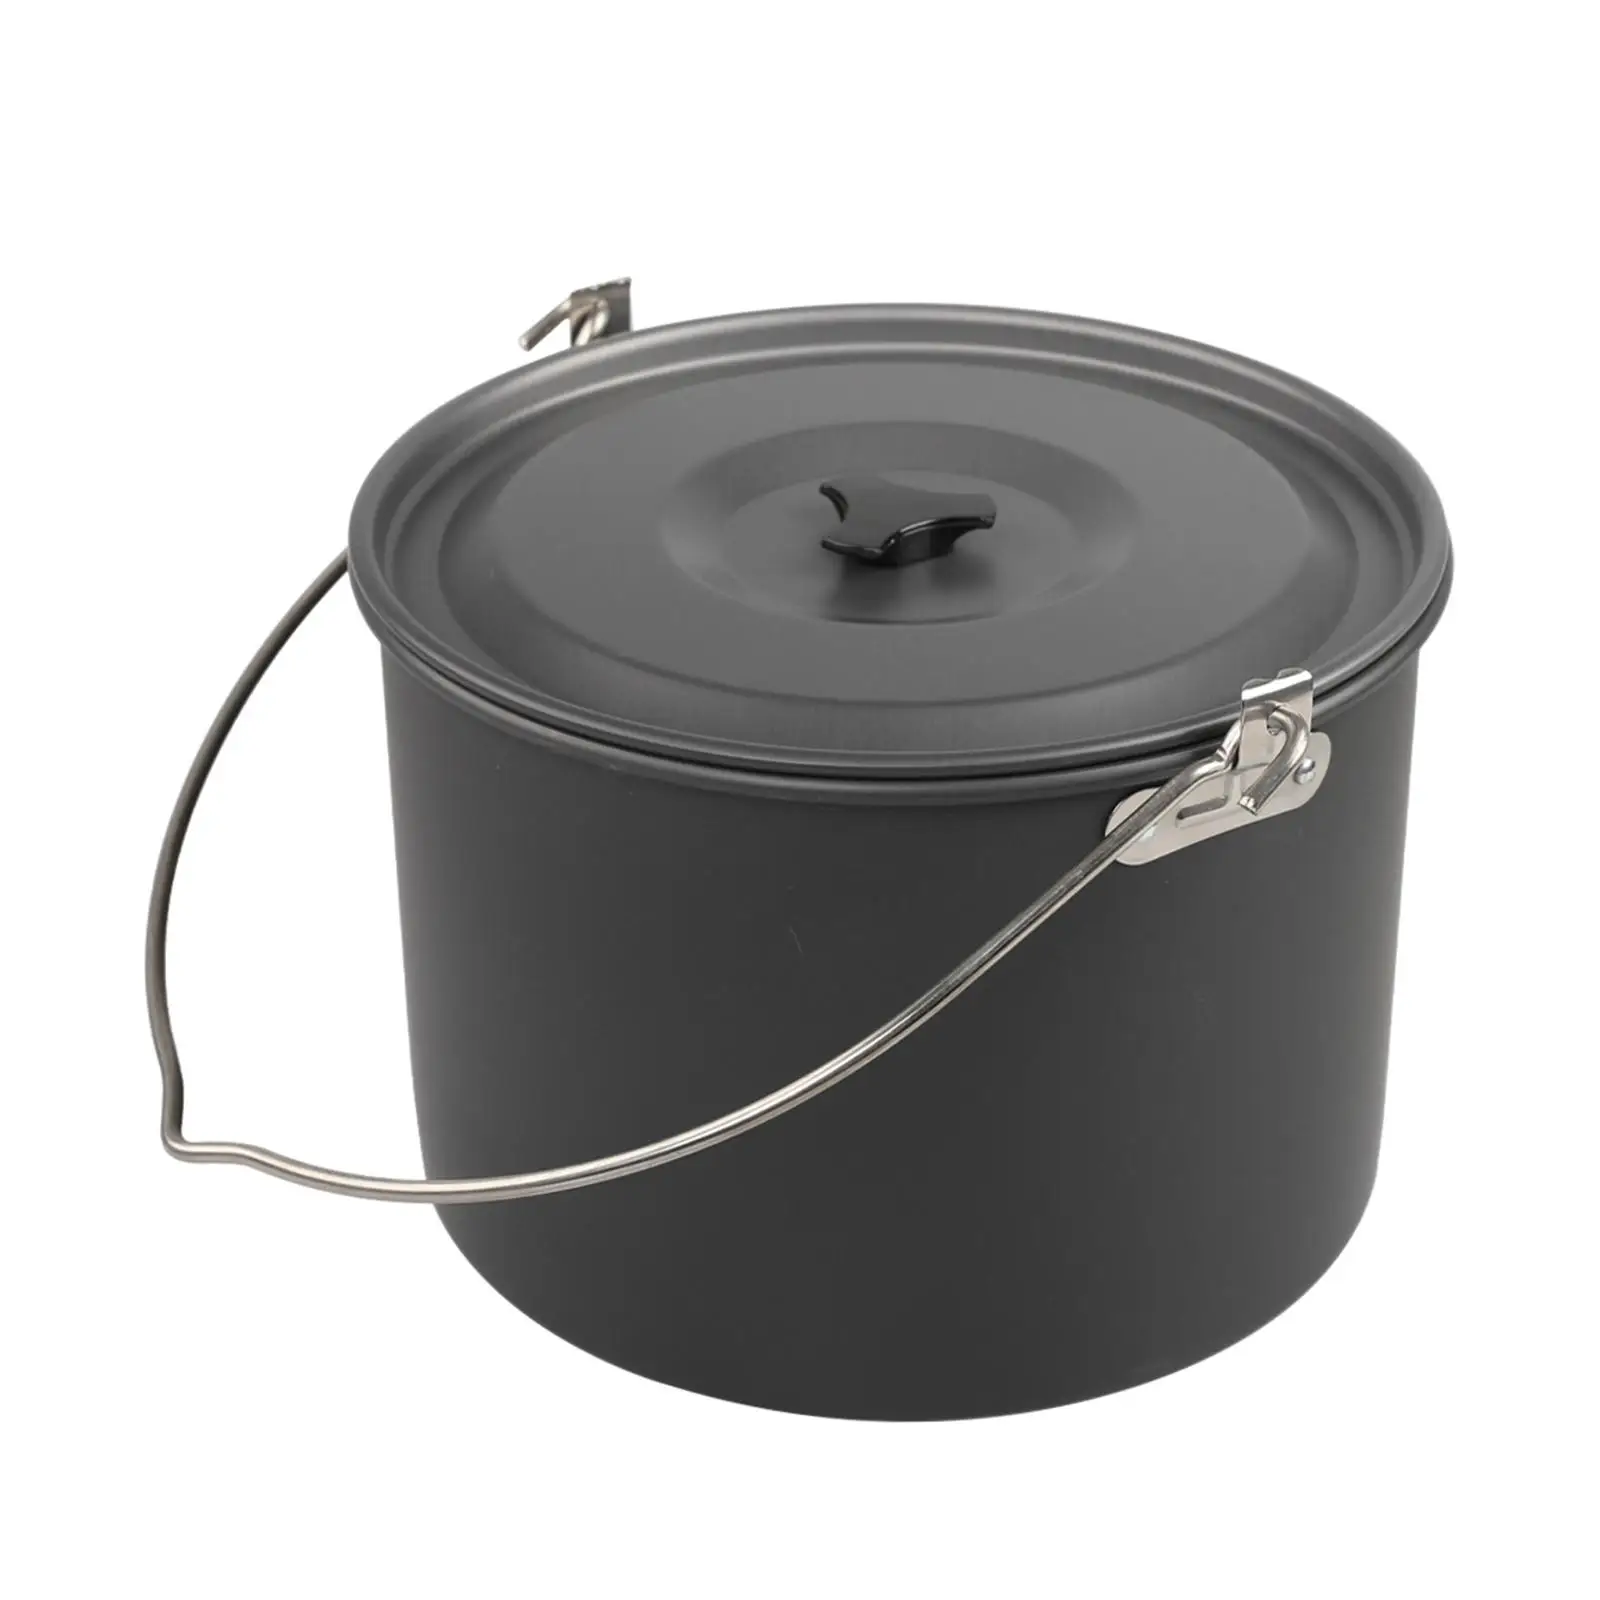 Cooking Pot High Capacity Lightweight Nonstick Camping Cookware Outdoor Pot Pan for Hiking Fishing Outdoor Survival Dinner